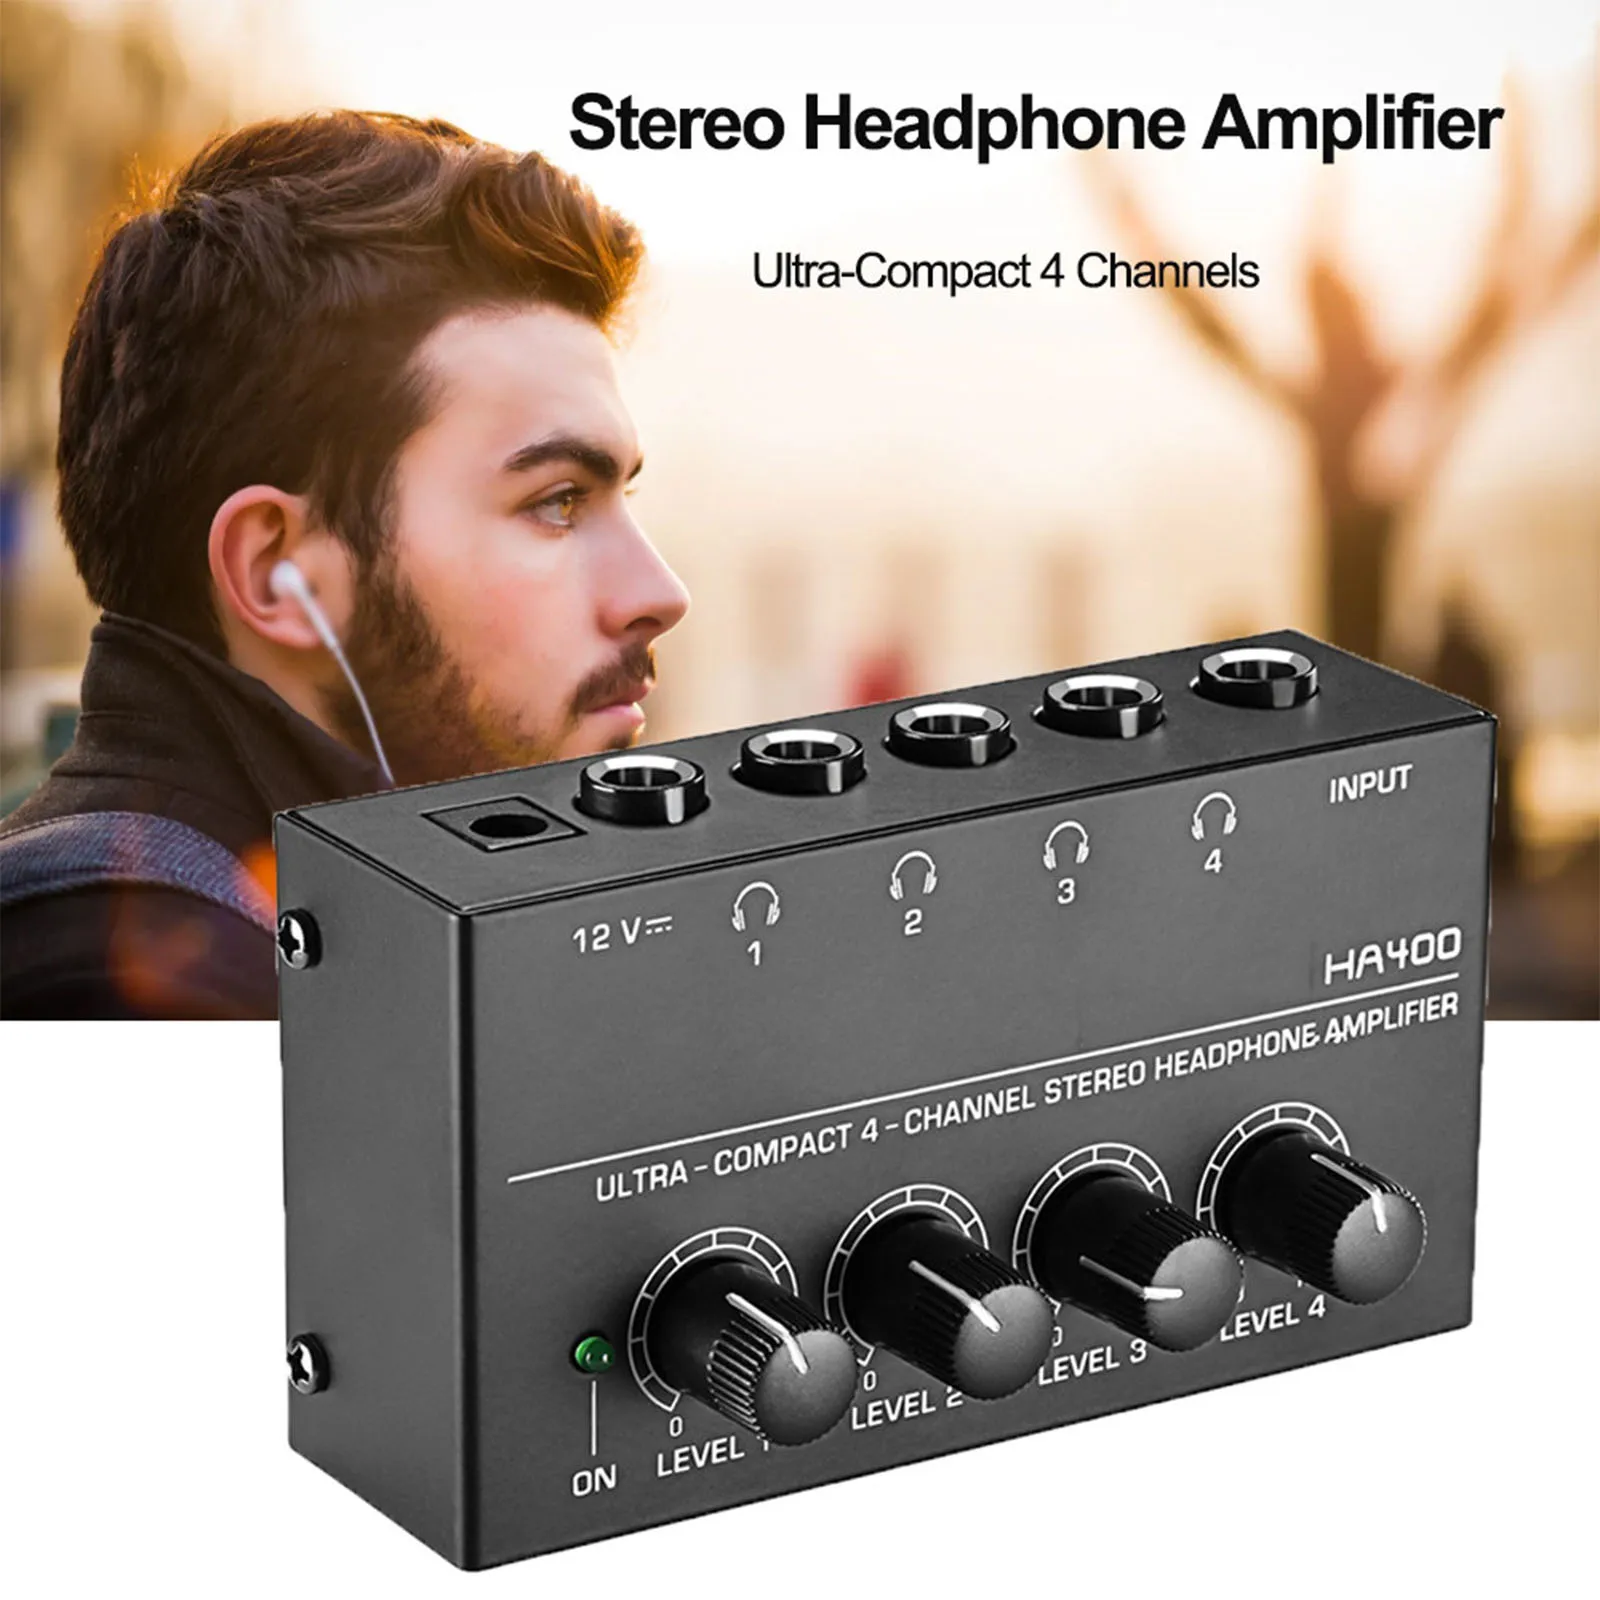 Audio Amplifier with Power Adapter 4 Channels Stereo Headphone Amplifier Ha400 Ultra-Compact 10Mhz Earphone Amp for Music